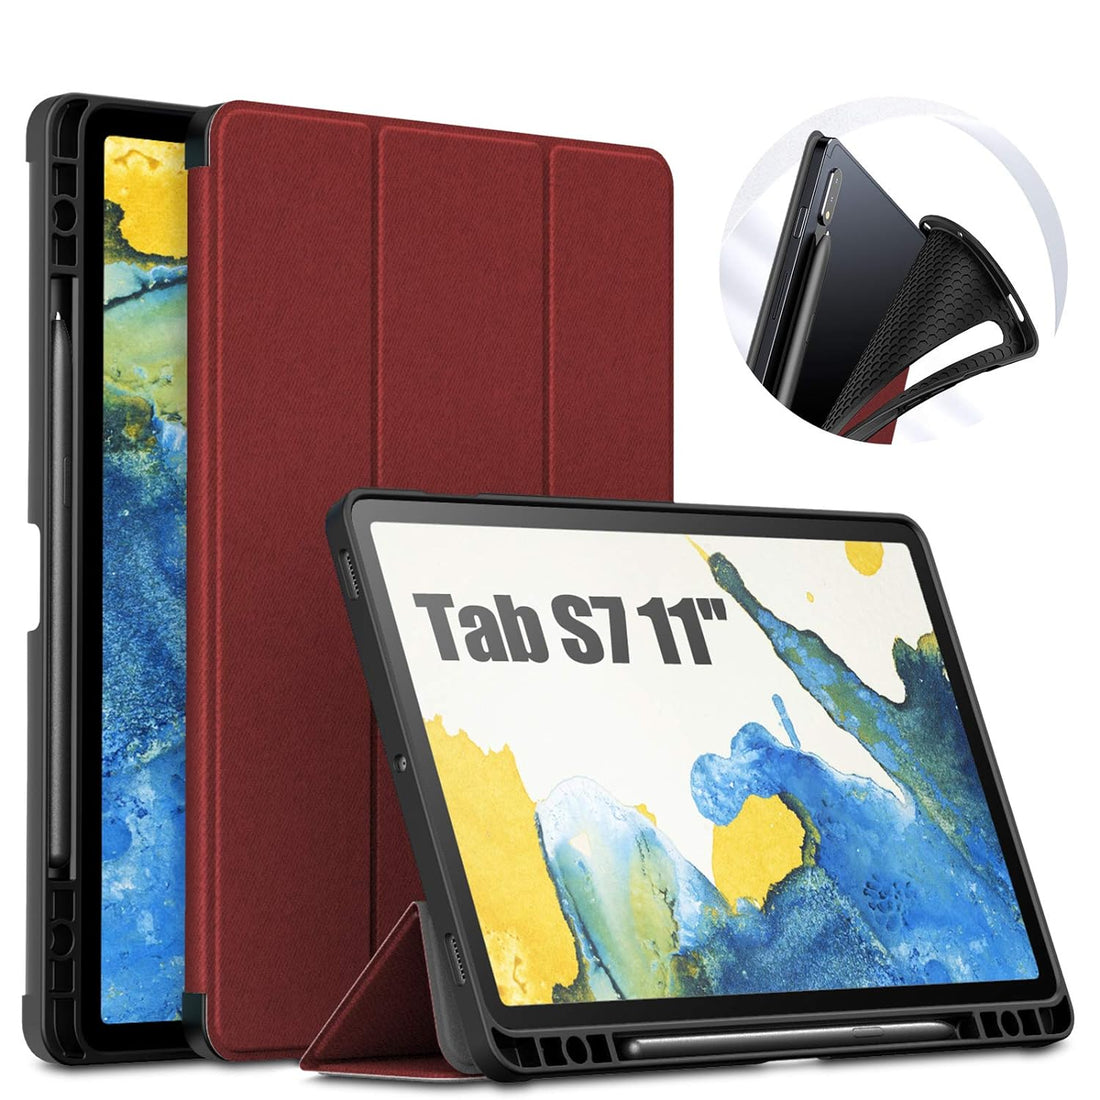 INFILAND Galaxy Tab S7 Case with S Pen Holder, Slim Tri-Fold Case Cover Compatible with Samsung Galaxy Tab S7 11-inch SM-T870/T875 2020 Release Tablet [Auto Wake/Sleep], Dark Red